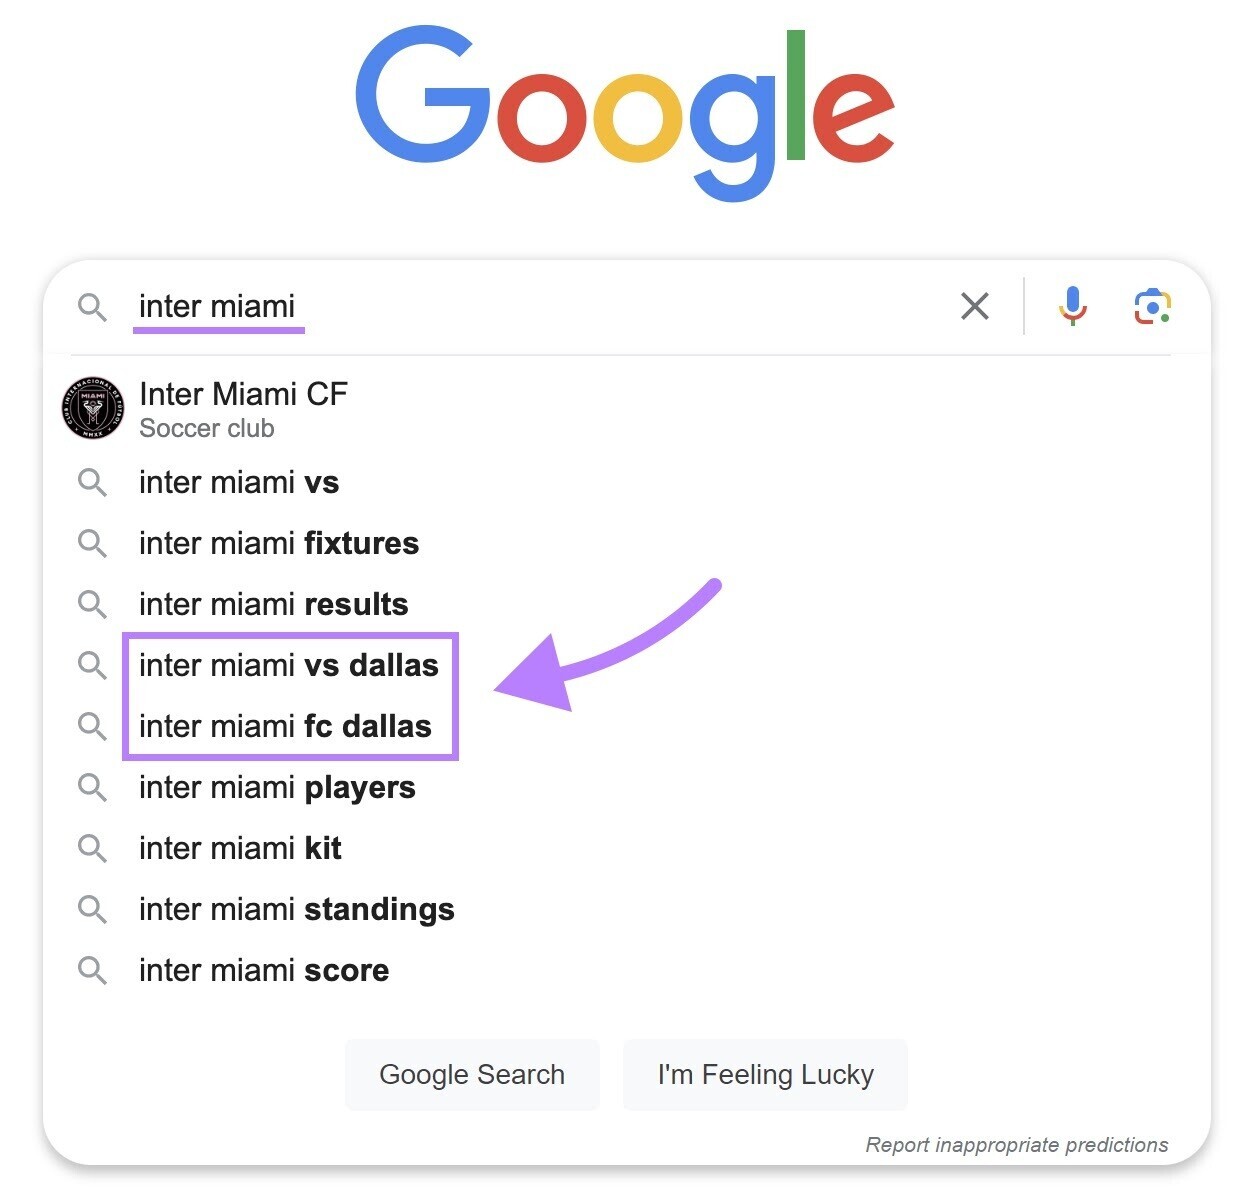 Google’s suggestions when typing "Inter Miami” in the search bar